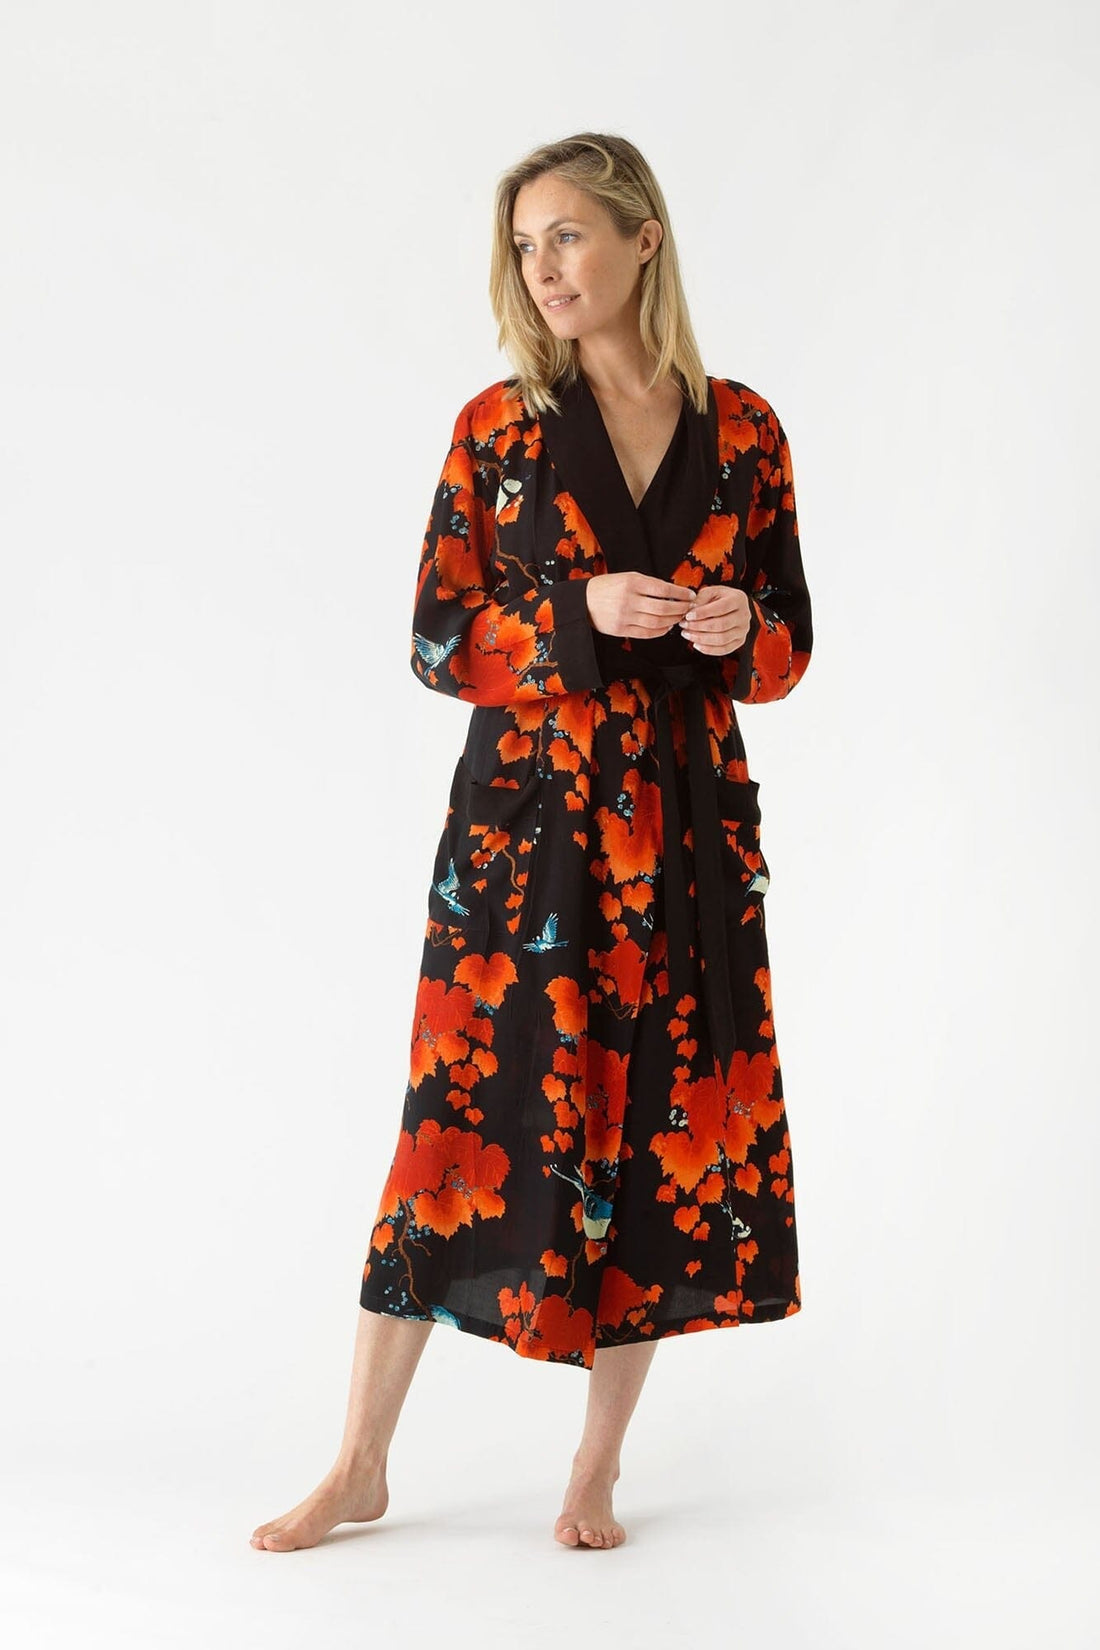 Crepe Gown in Black Acer Print by One Hundred Stars - CGWACRBLK Gowns One Hundred Stars